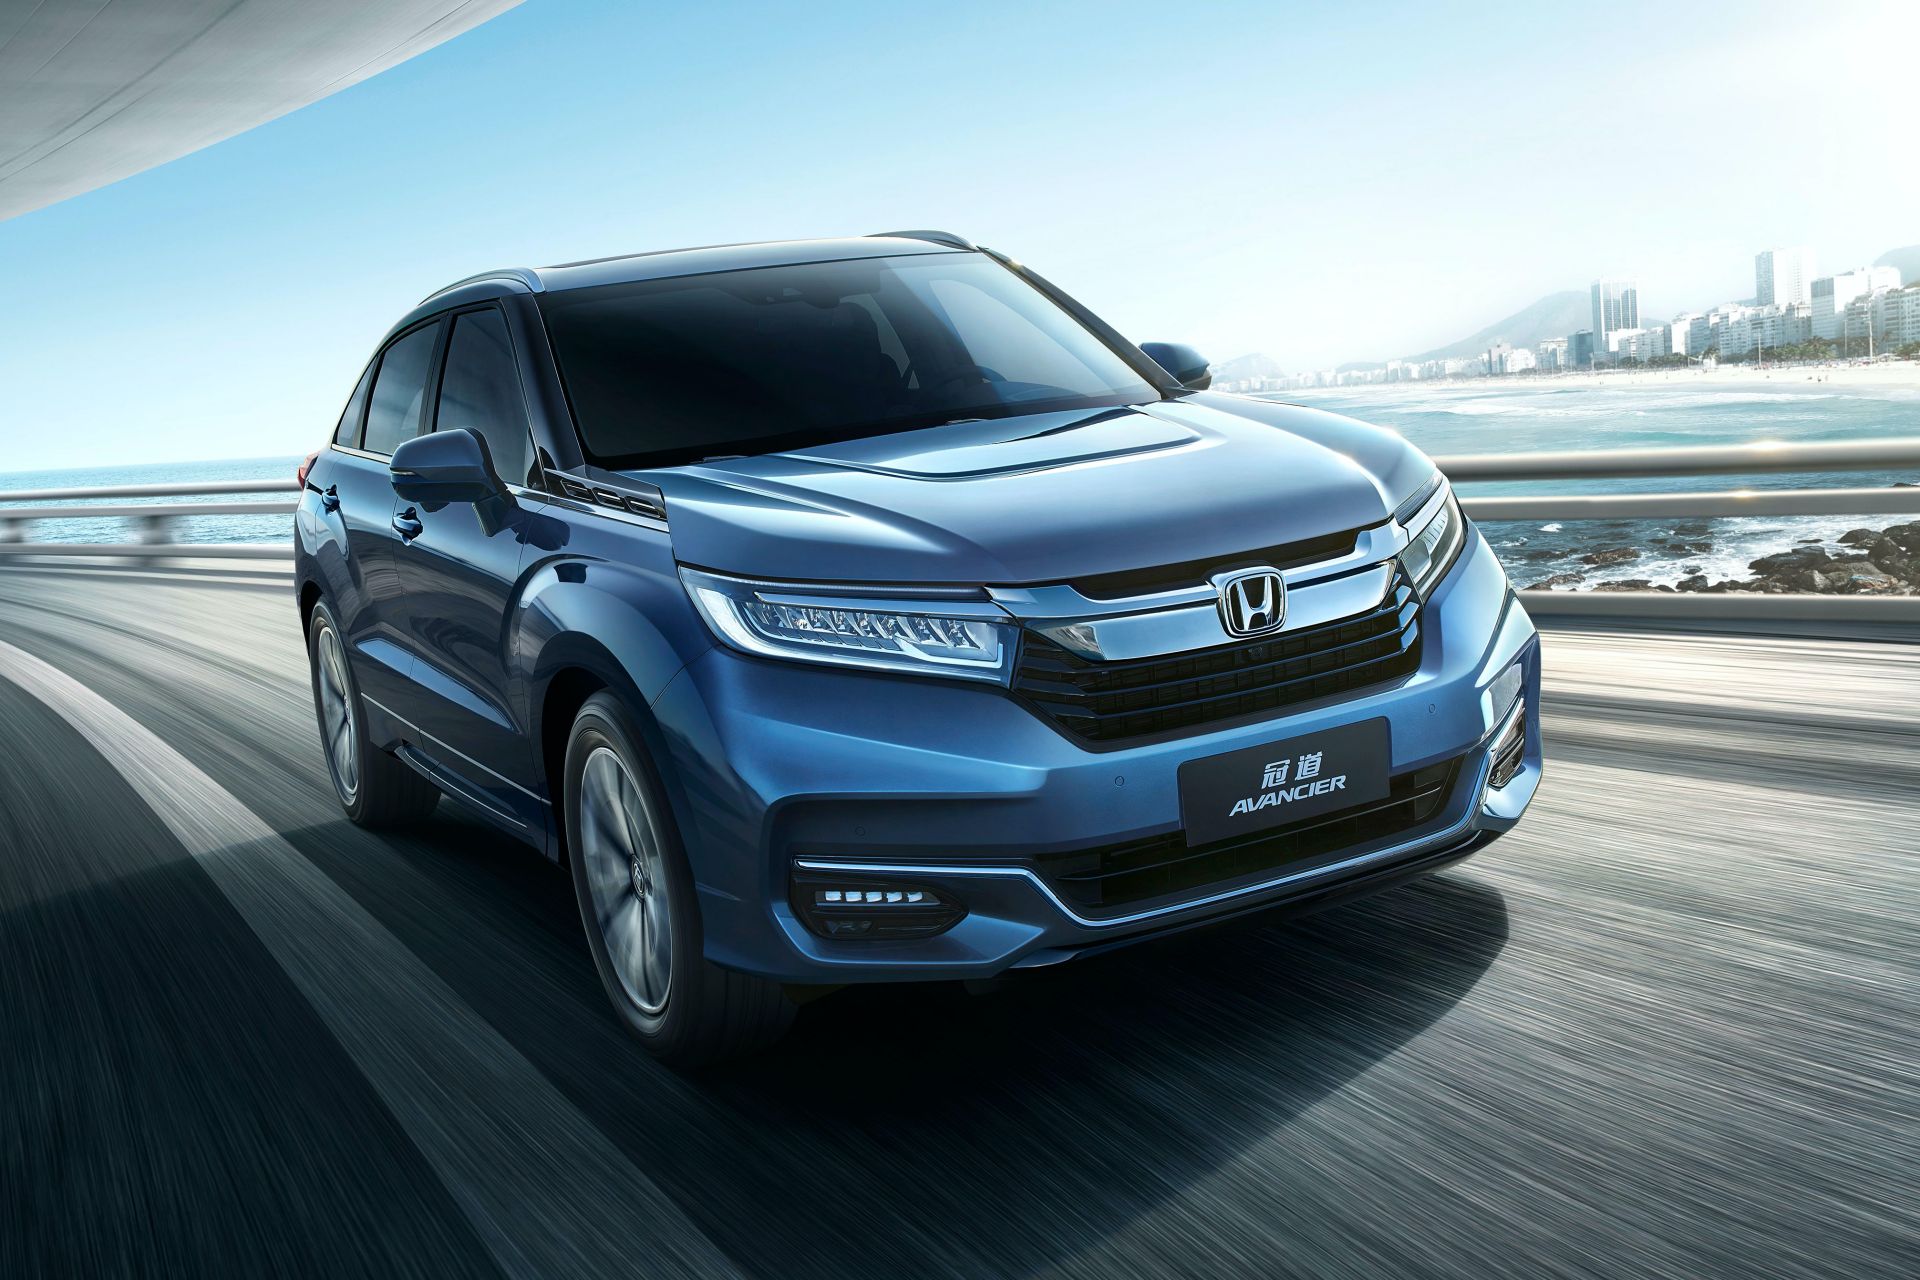 Honda S Avancier Flagship Suv In China Gets Subtle Facelift And Tech Upgrades Carscoops